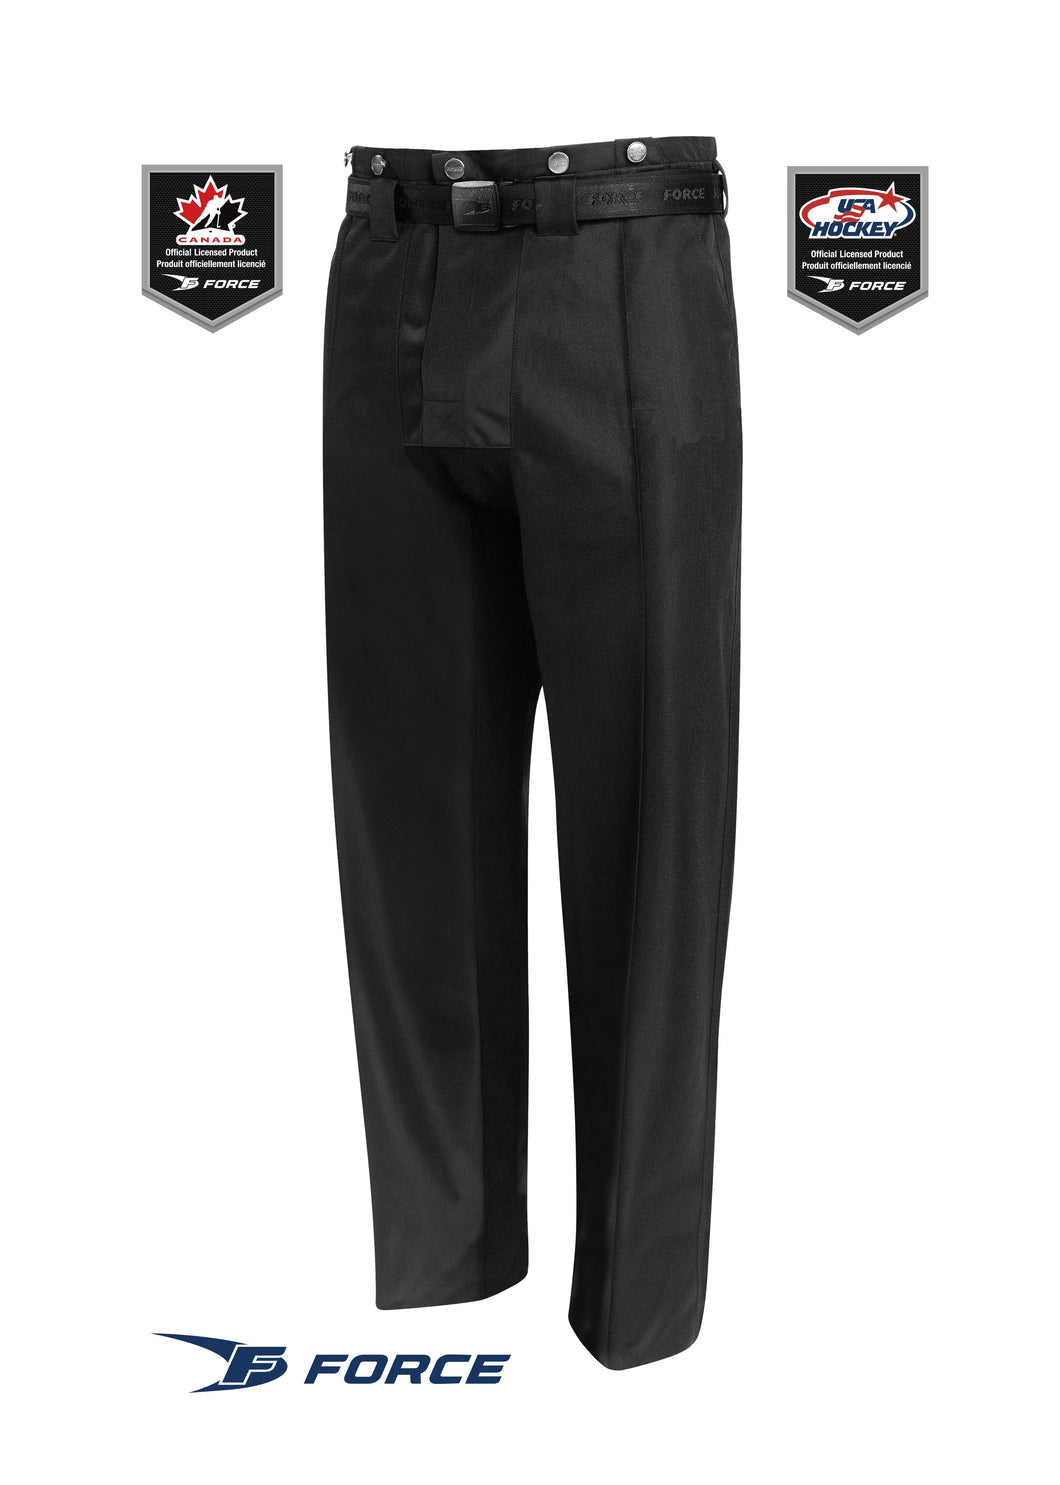 USA Force PRO A-21 Officiating Pant